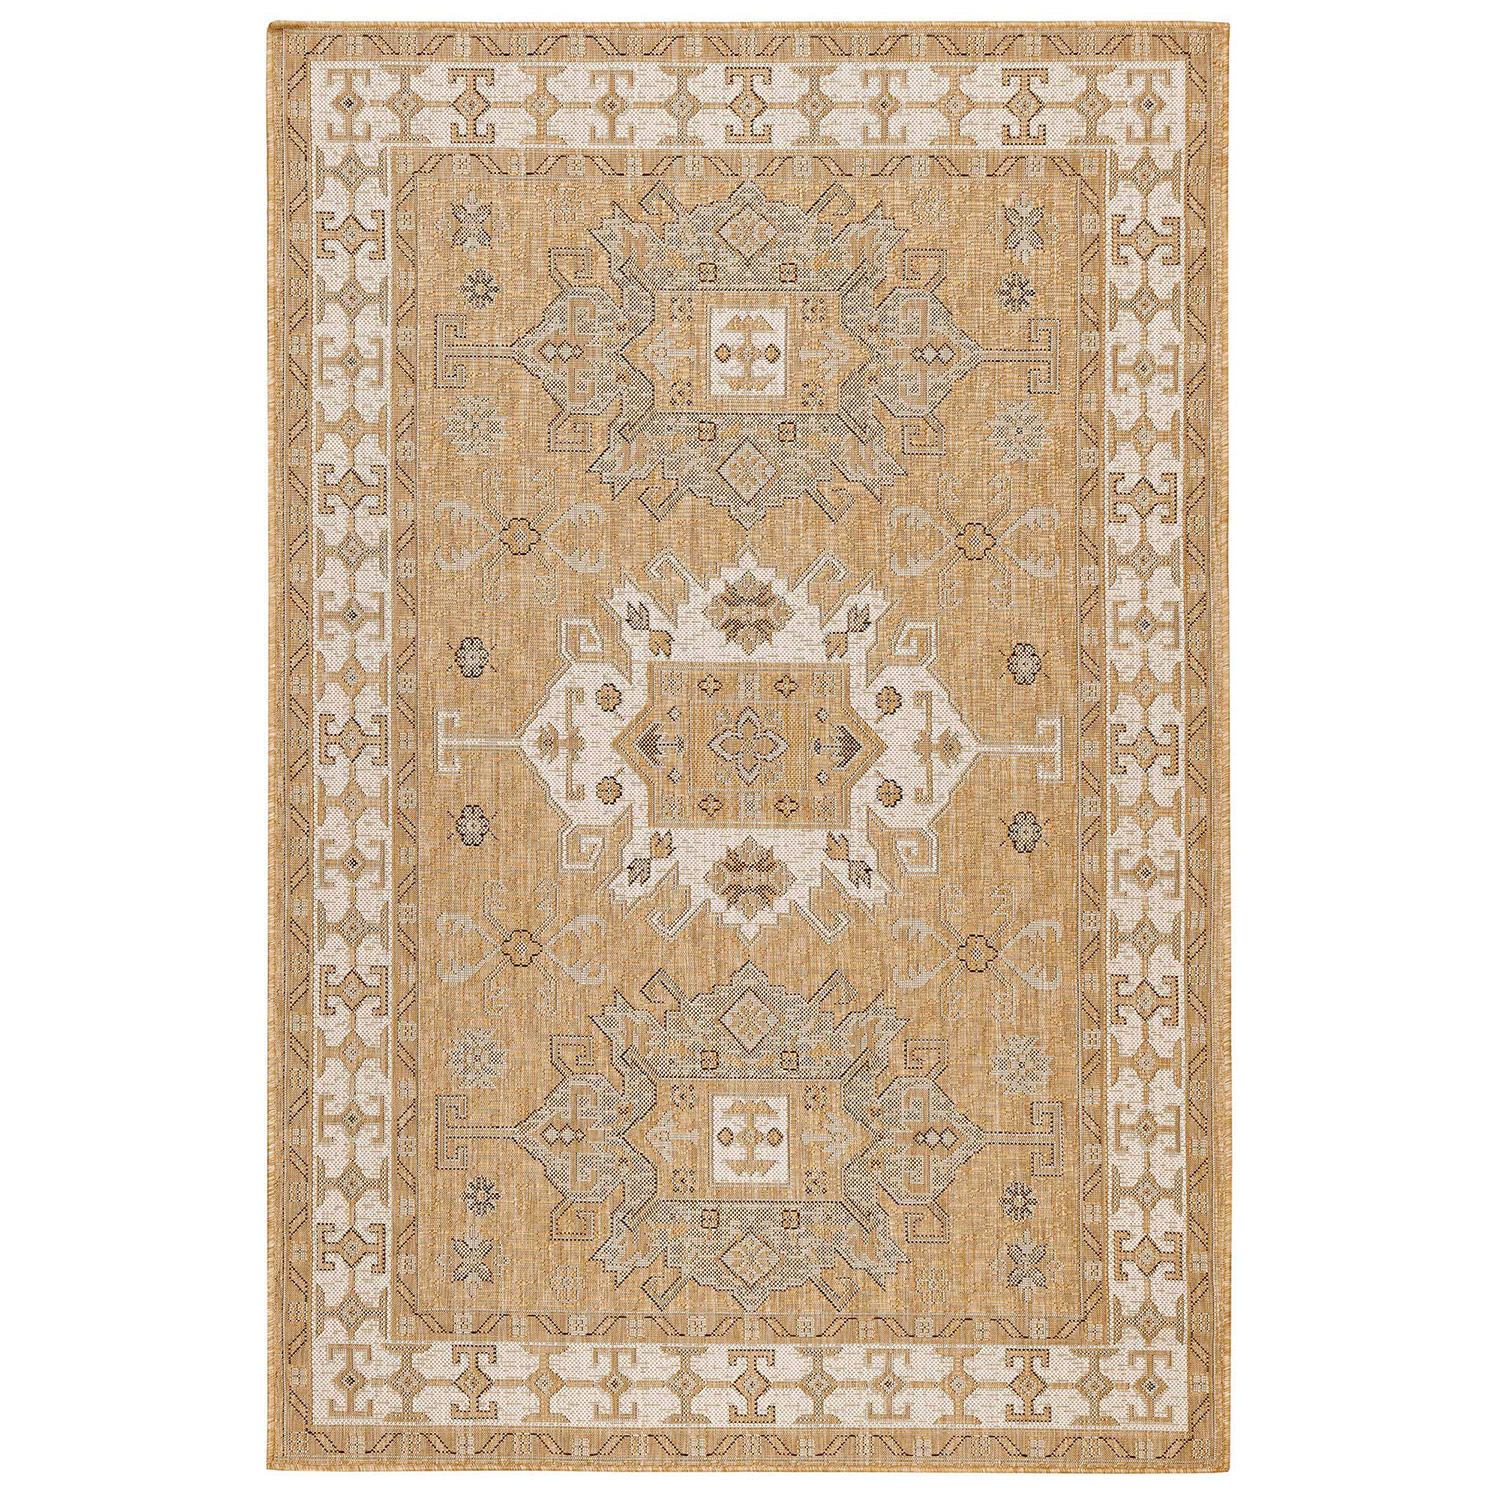 Liora Manne Carmel Low Profile  Easy Care Indoor/Outdoor Woven Rug-Traditional, Oriental, Global, Tr Product Image